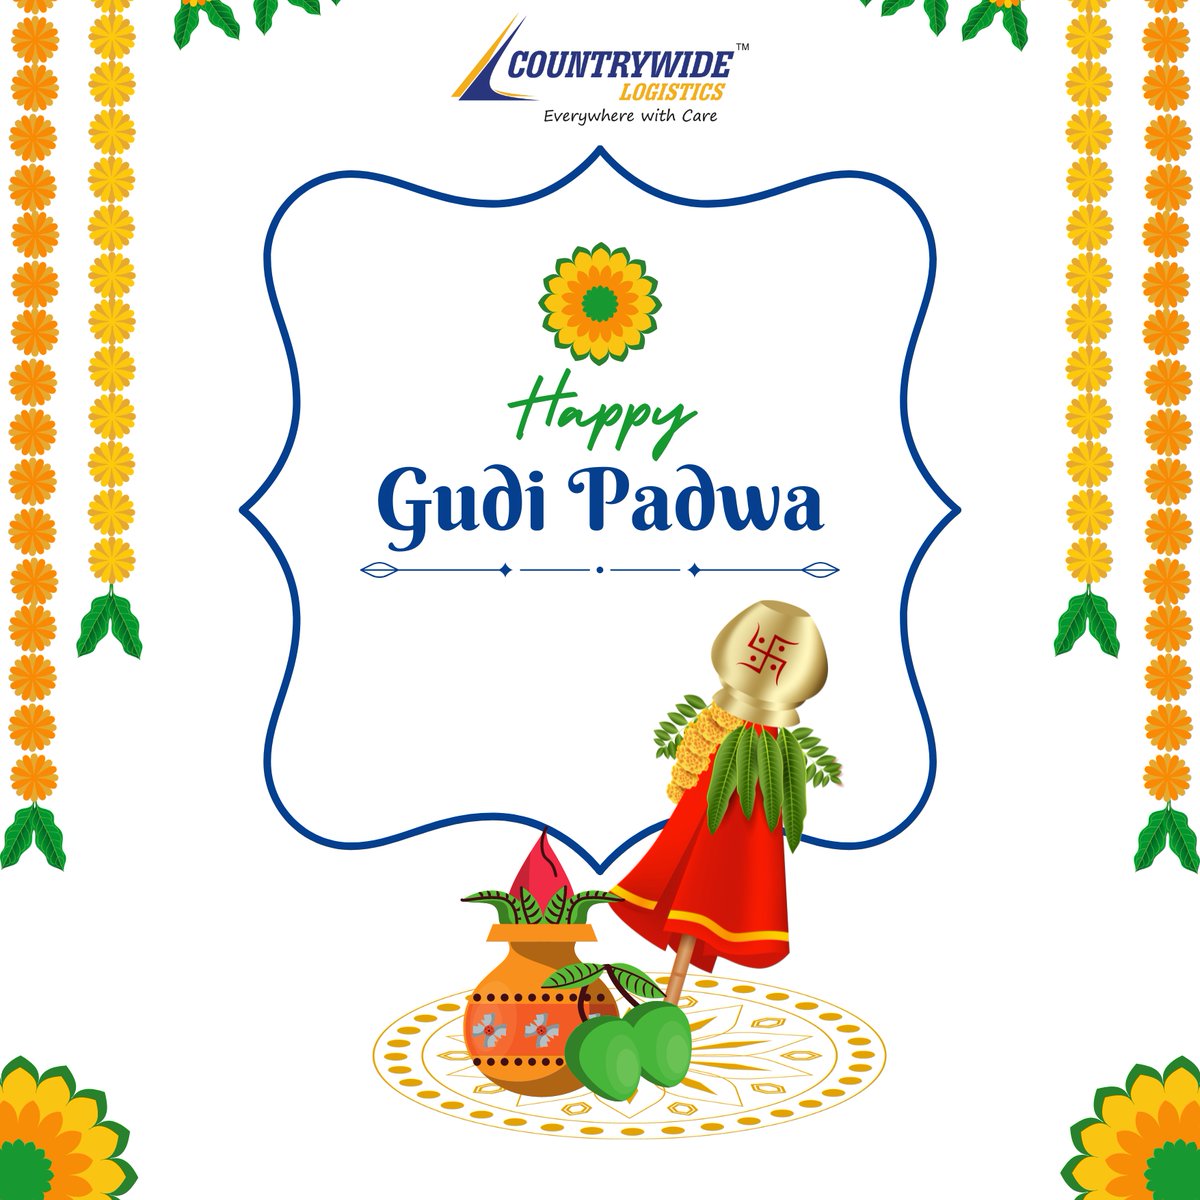 May this Gudi Padwa bring prosperity, joy, and success to all! Wishing you a happy and auspicious Gudi Padwa from all of us at Countrywide Logistics India Pvt. Ltd. 🌟🪔

#GudiPadwa #Festival #Prosperity #Joy #CountrywideLogistics #IndianFestivals #India #PanIndia